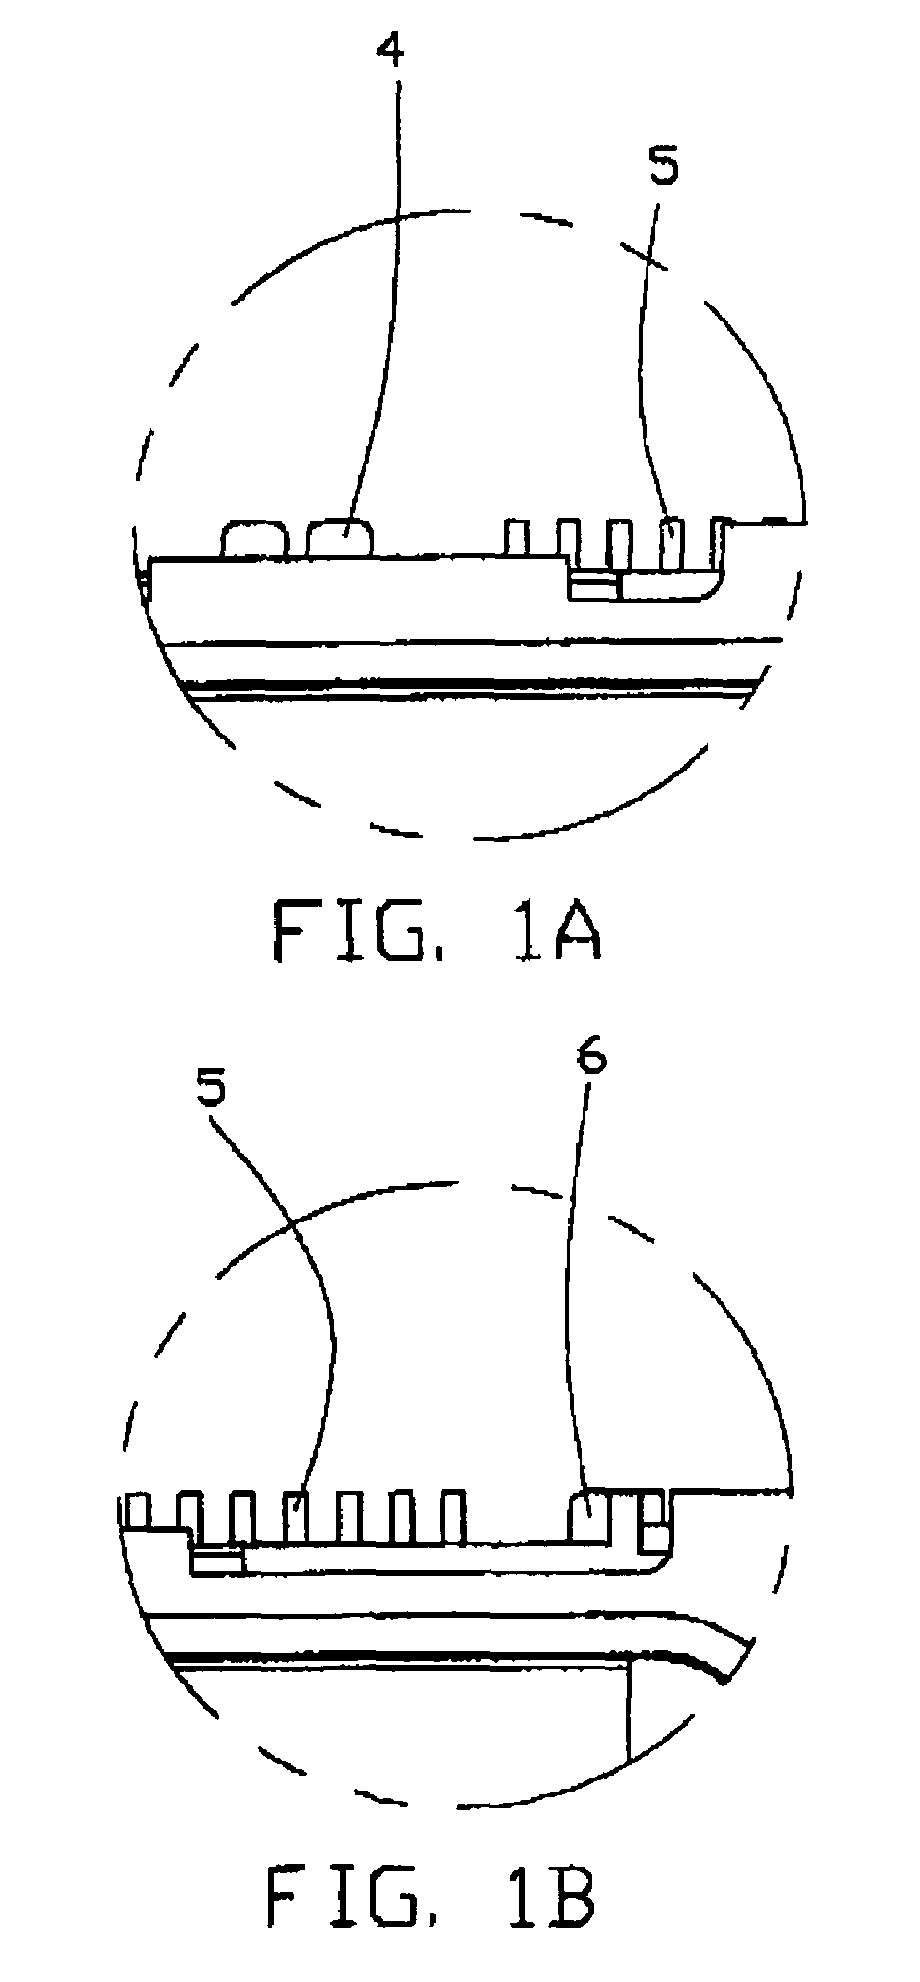 Board-mounted electrical connector with balanced solder attachment to a circuit board